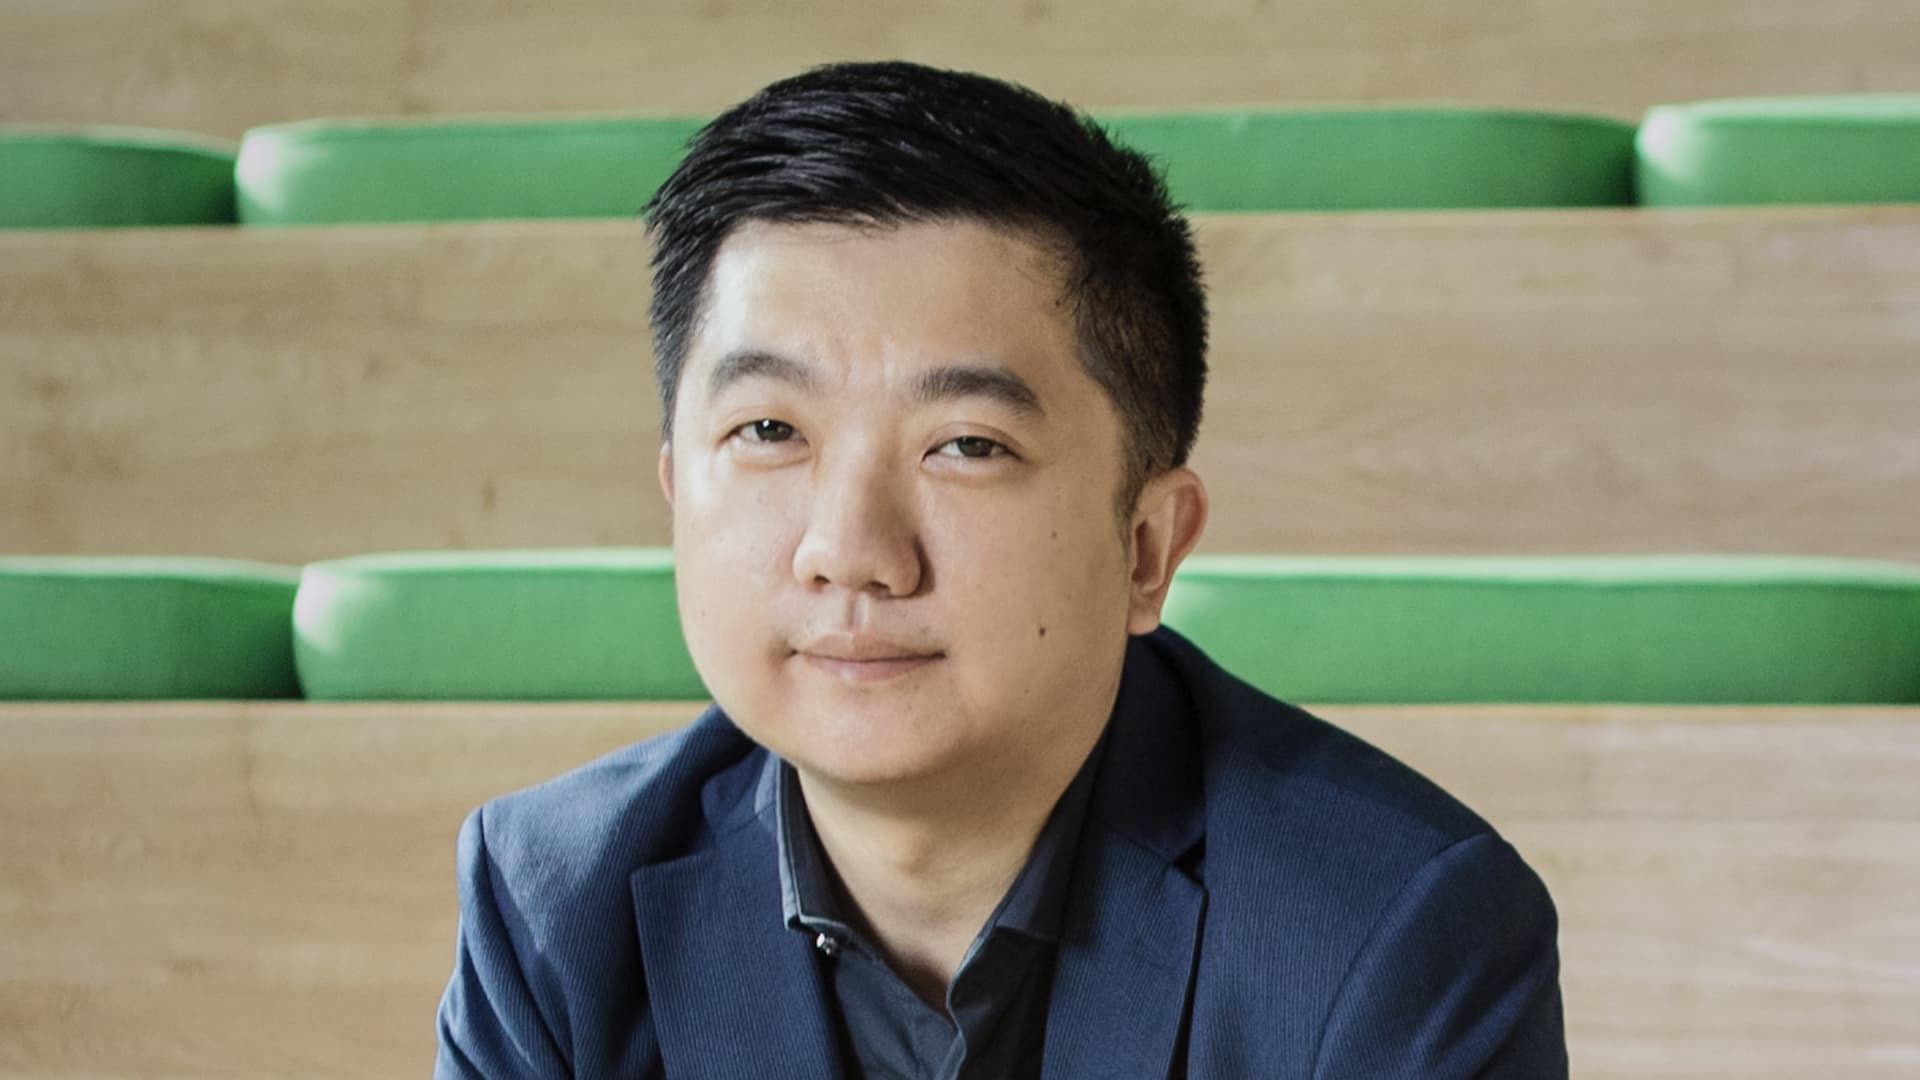 William Tanuwijaya, co-founder and CEO of Tokopedia, part of Indonesian tech giant GoTo.